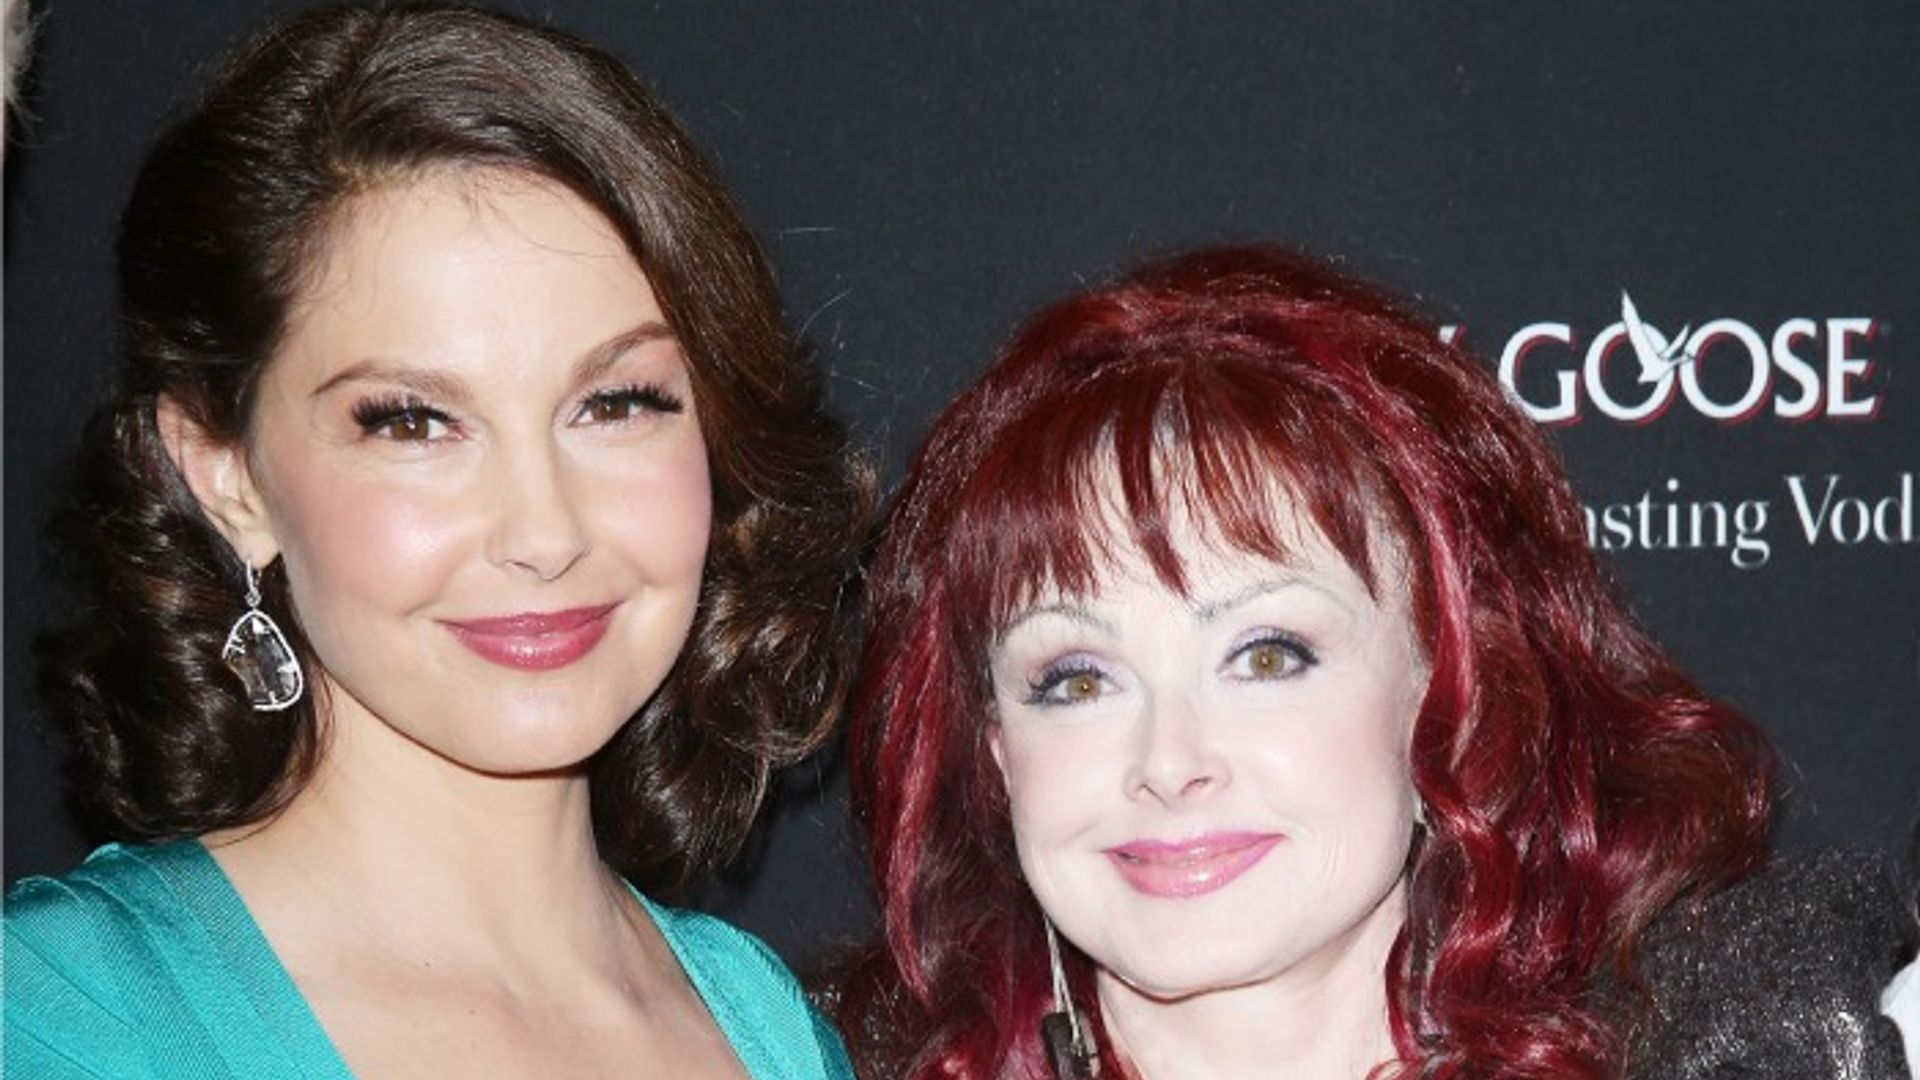 Ashley Judd details heartbreaking moment she discovered mom Naomi's body: 'I told her it was okay to let go'